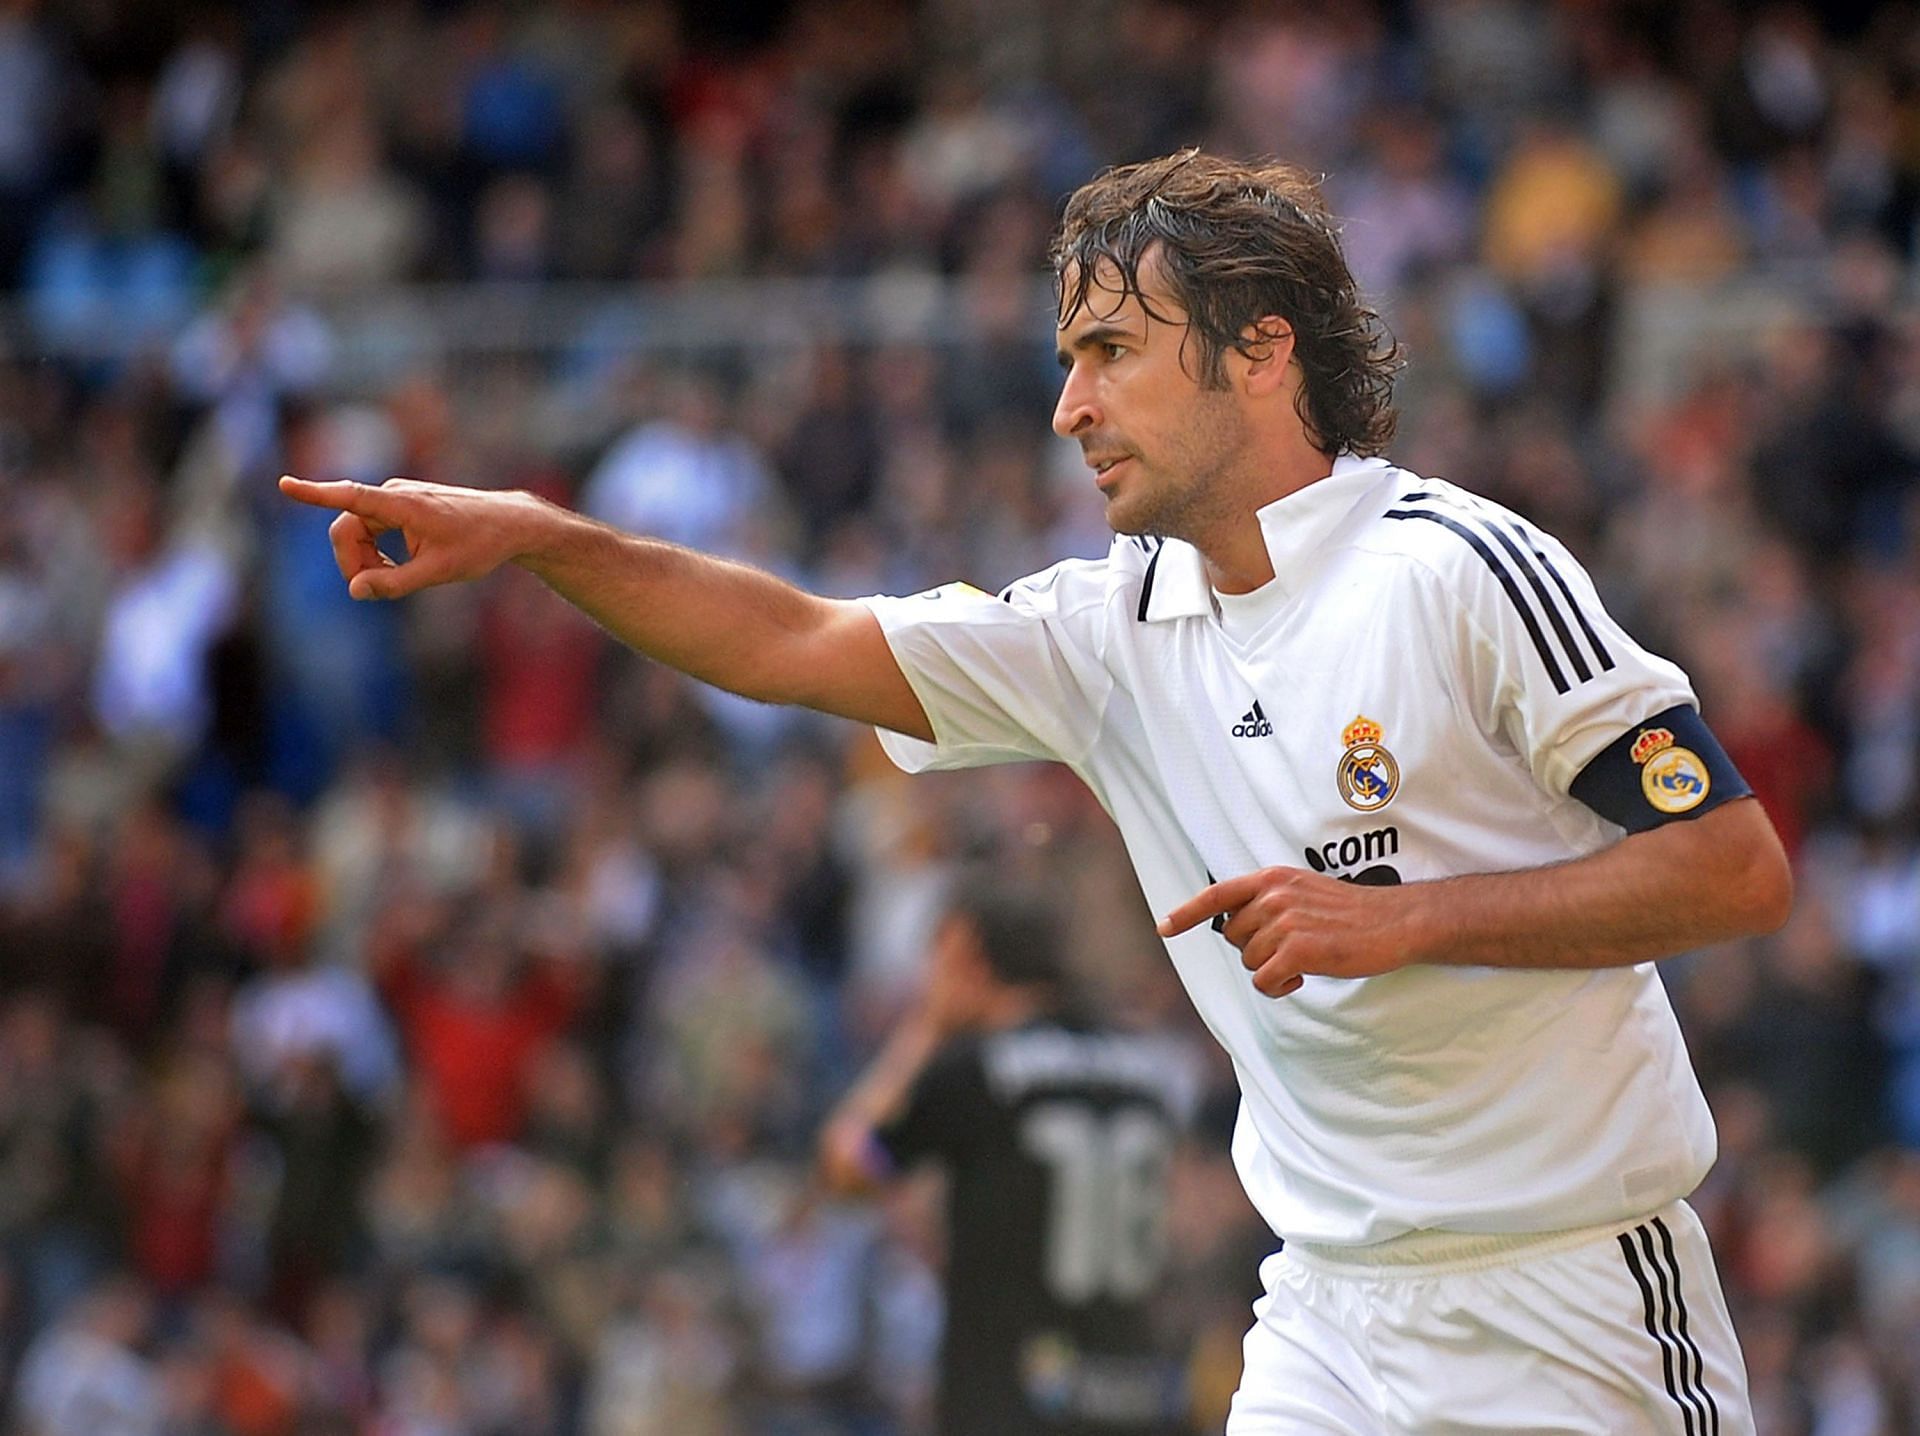 Madrid spotted Raul during his La Fabrica days